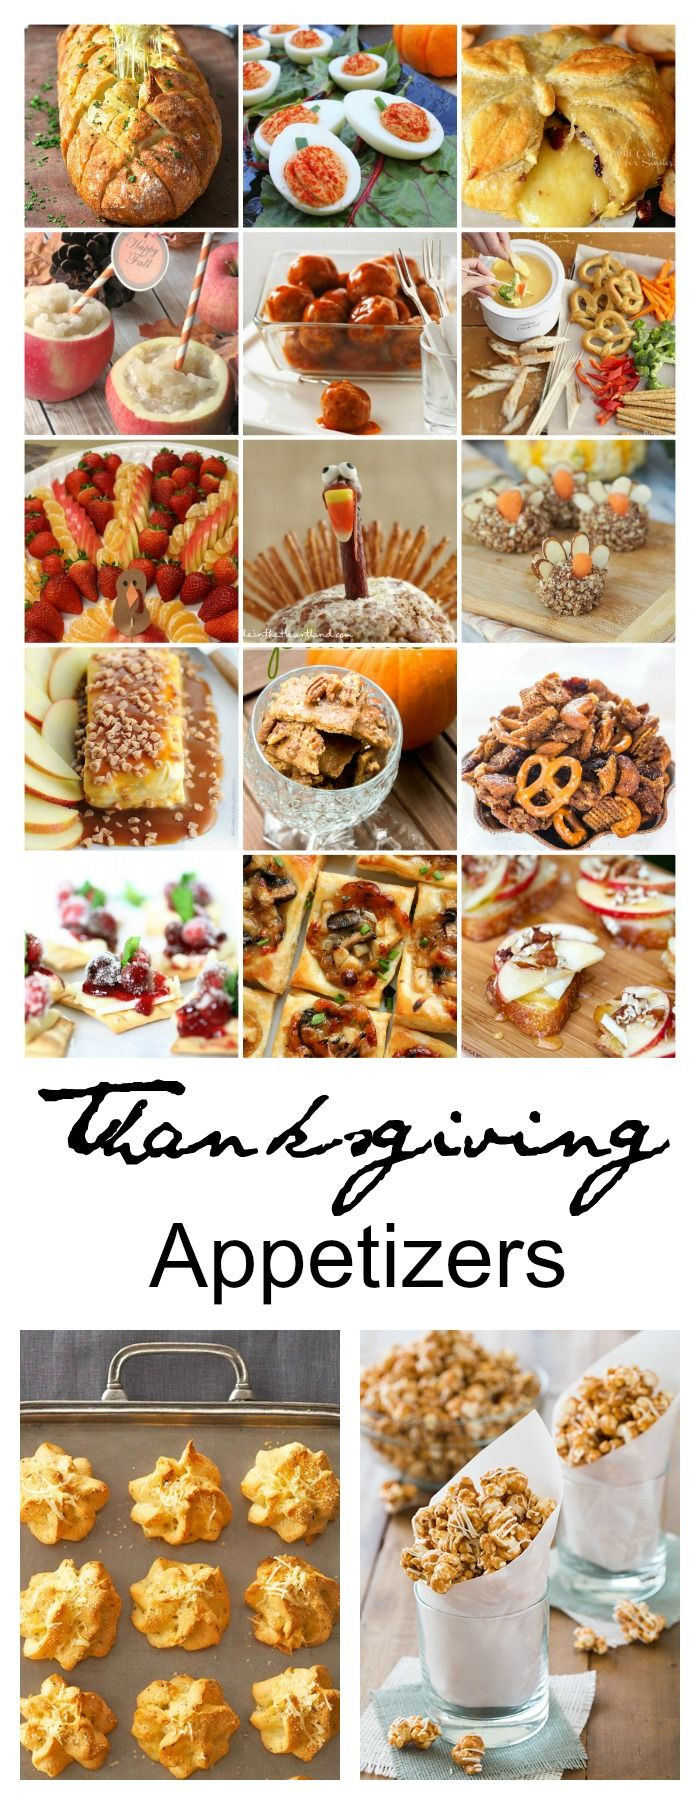 Good Thanksgiving Appetizers
 25 best ideas about Thanksgiving appetizers on Pinterest